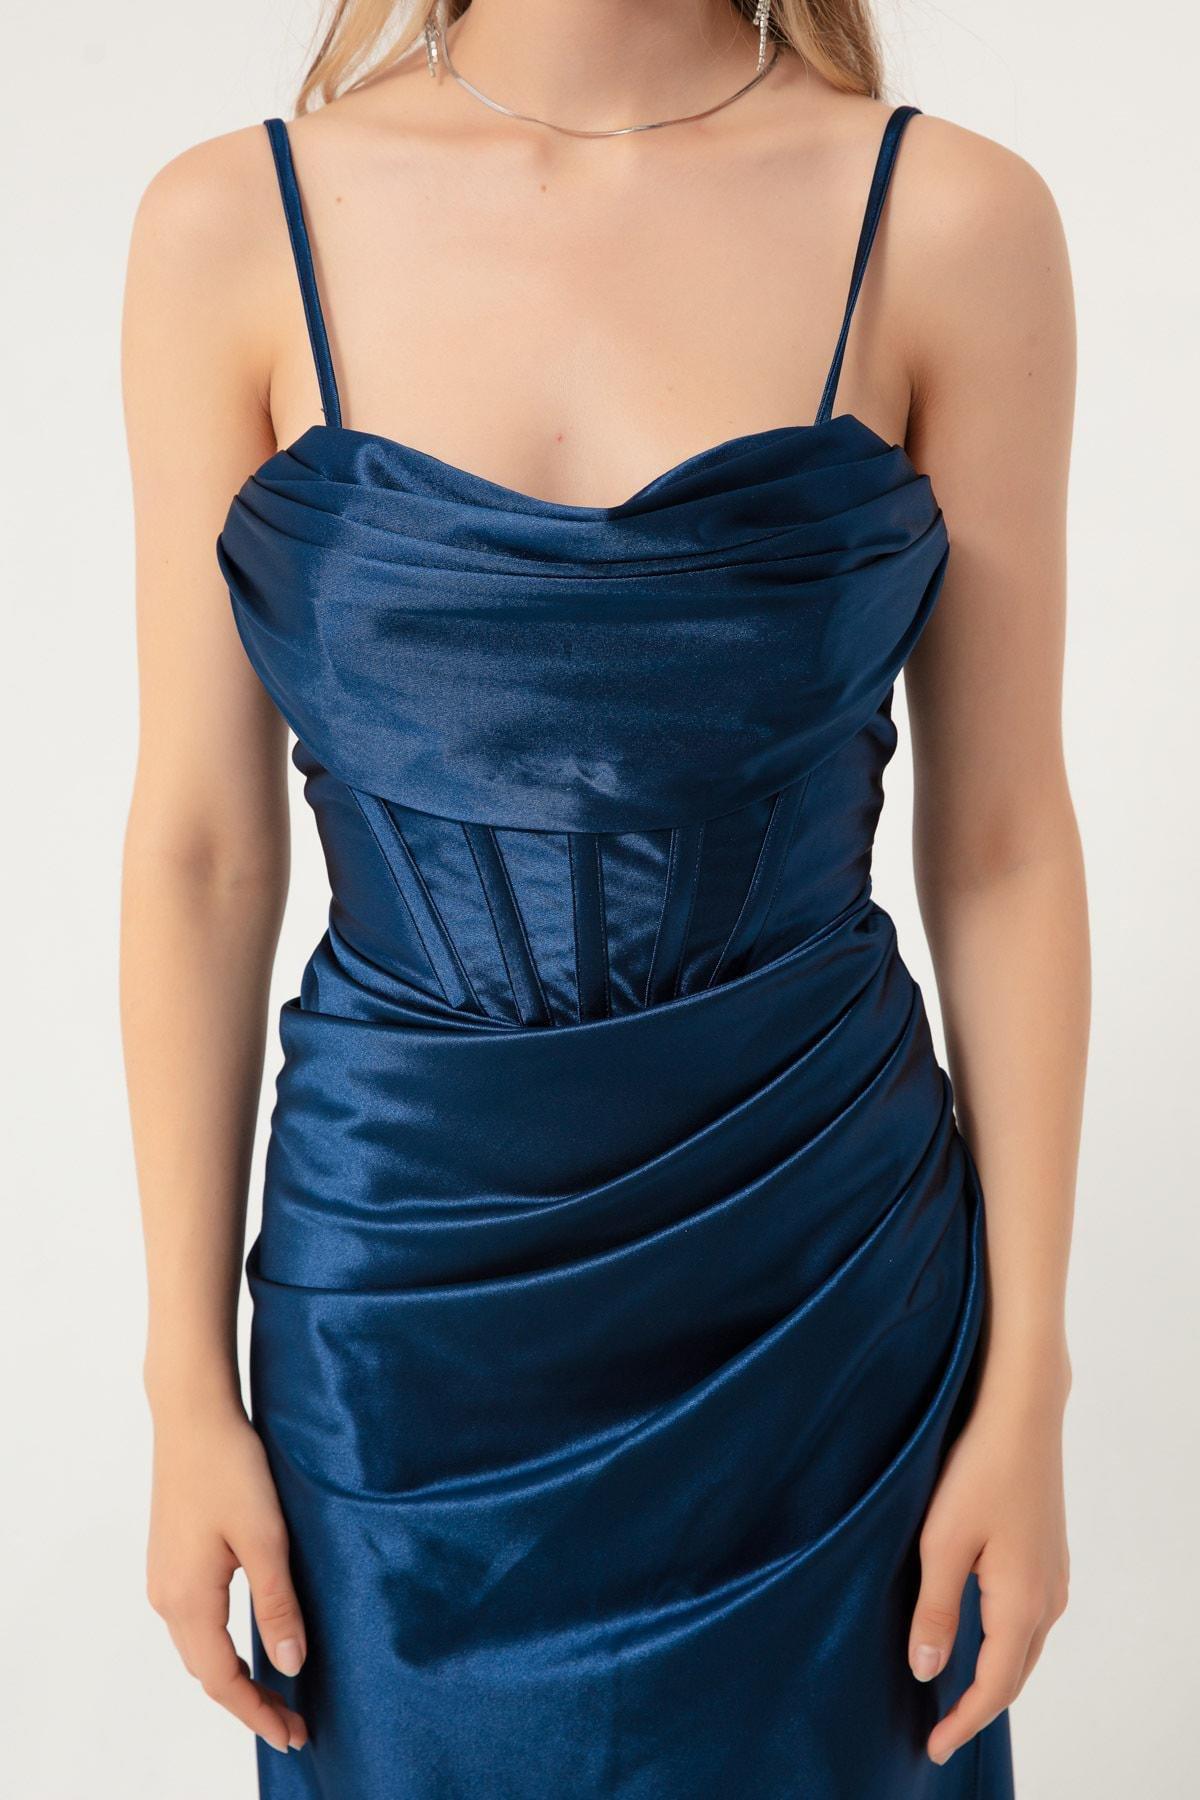 Lafaba - Navy Underwire Corset Detailed Occasion Wear Dress